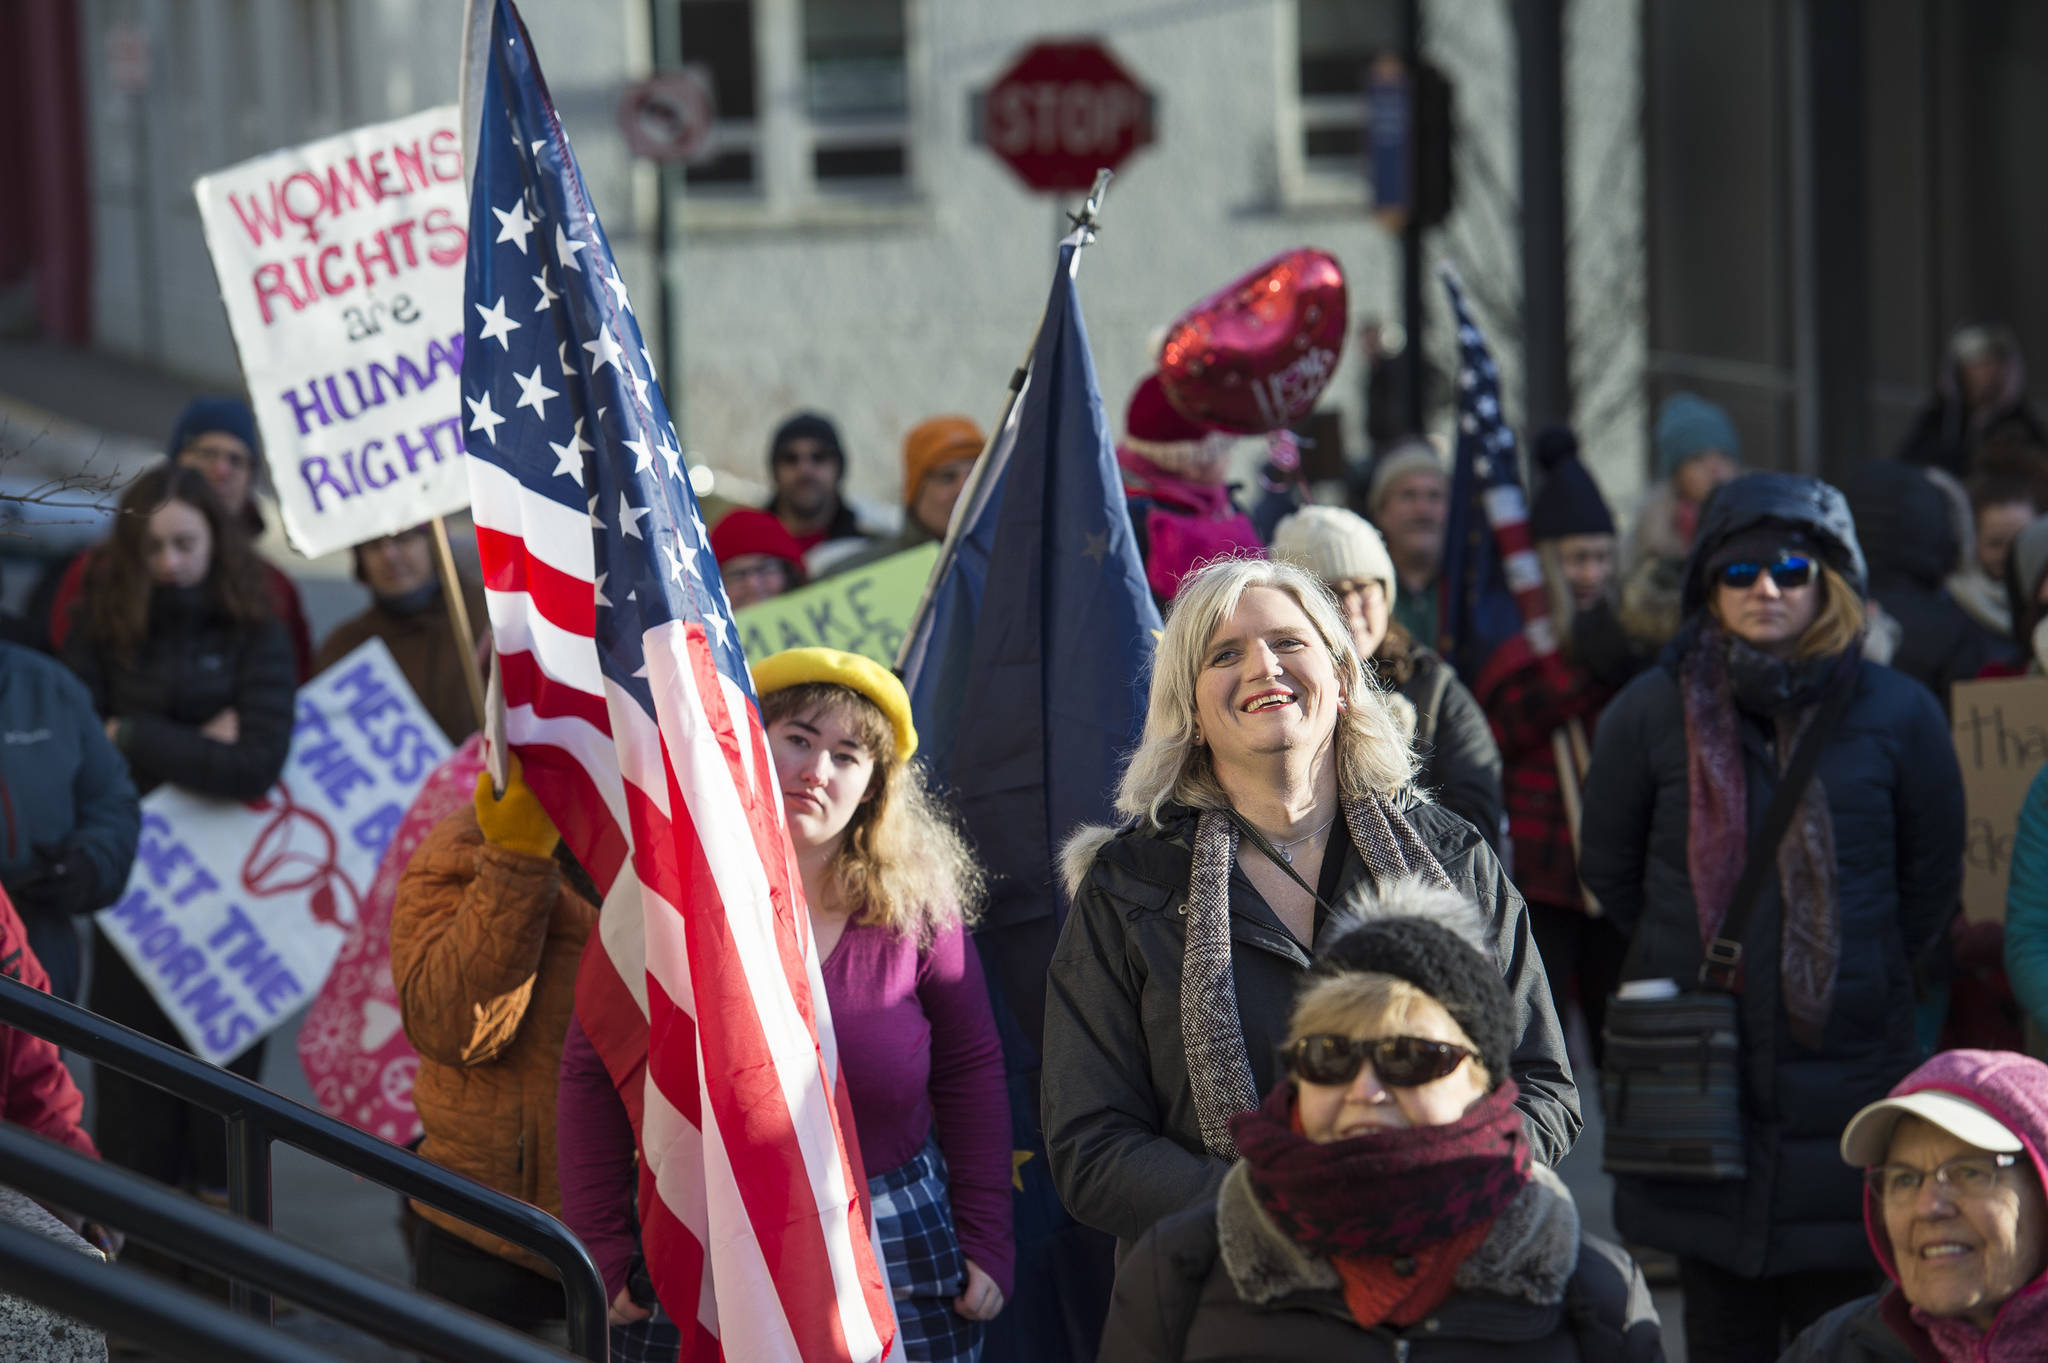 Allison Caputo is introduced at the Women’s March on Juneau in front of the Alaska State Capitol on Saturday, Jan. 19, 2019. (Michael Penn | Juneau Empire)